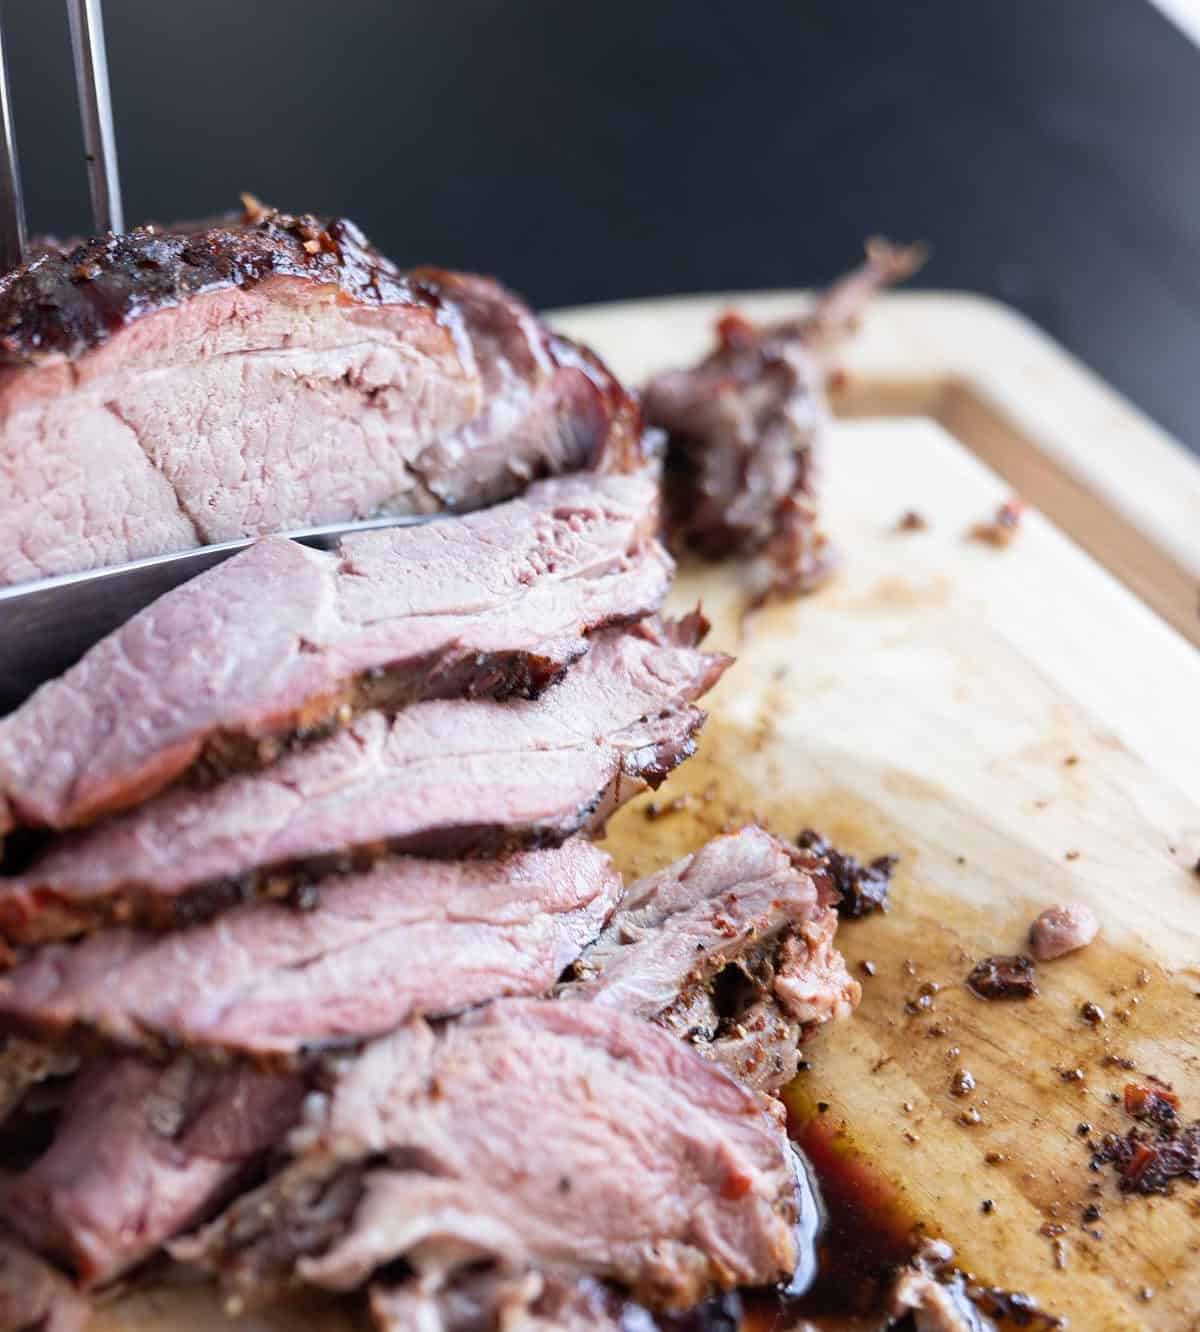  Take a gamble with our smoked lamb roast, and trust us when we say it will pay off!